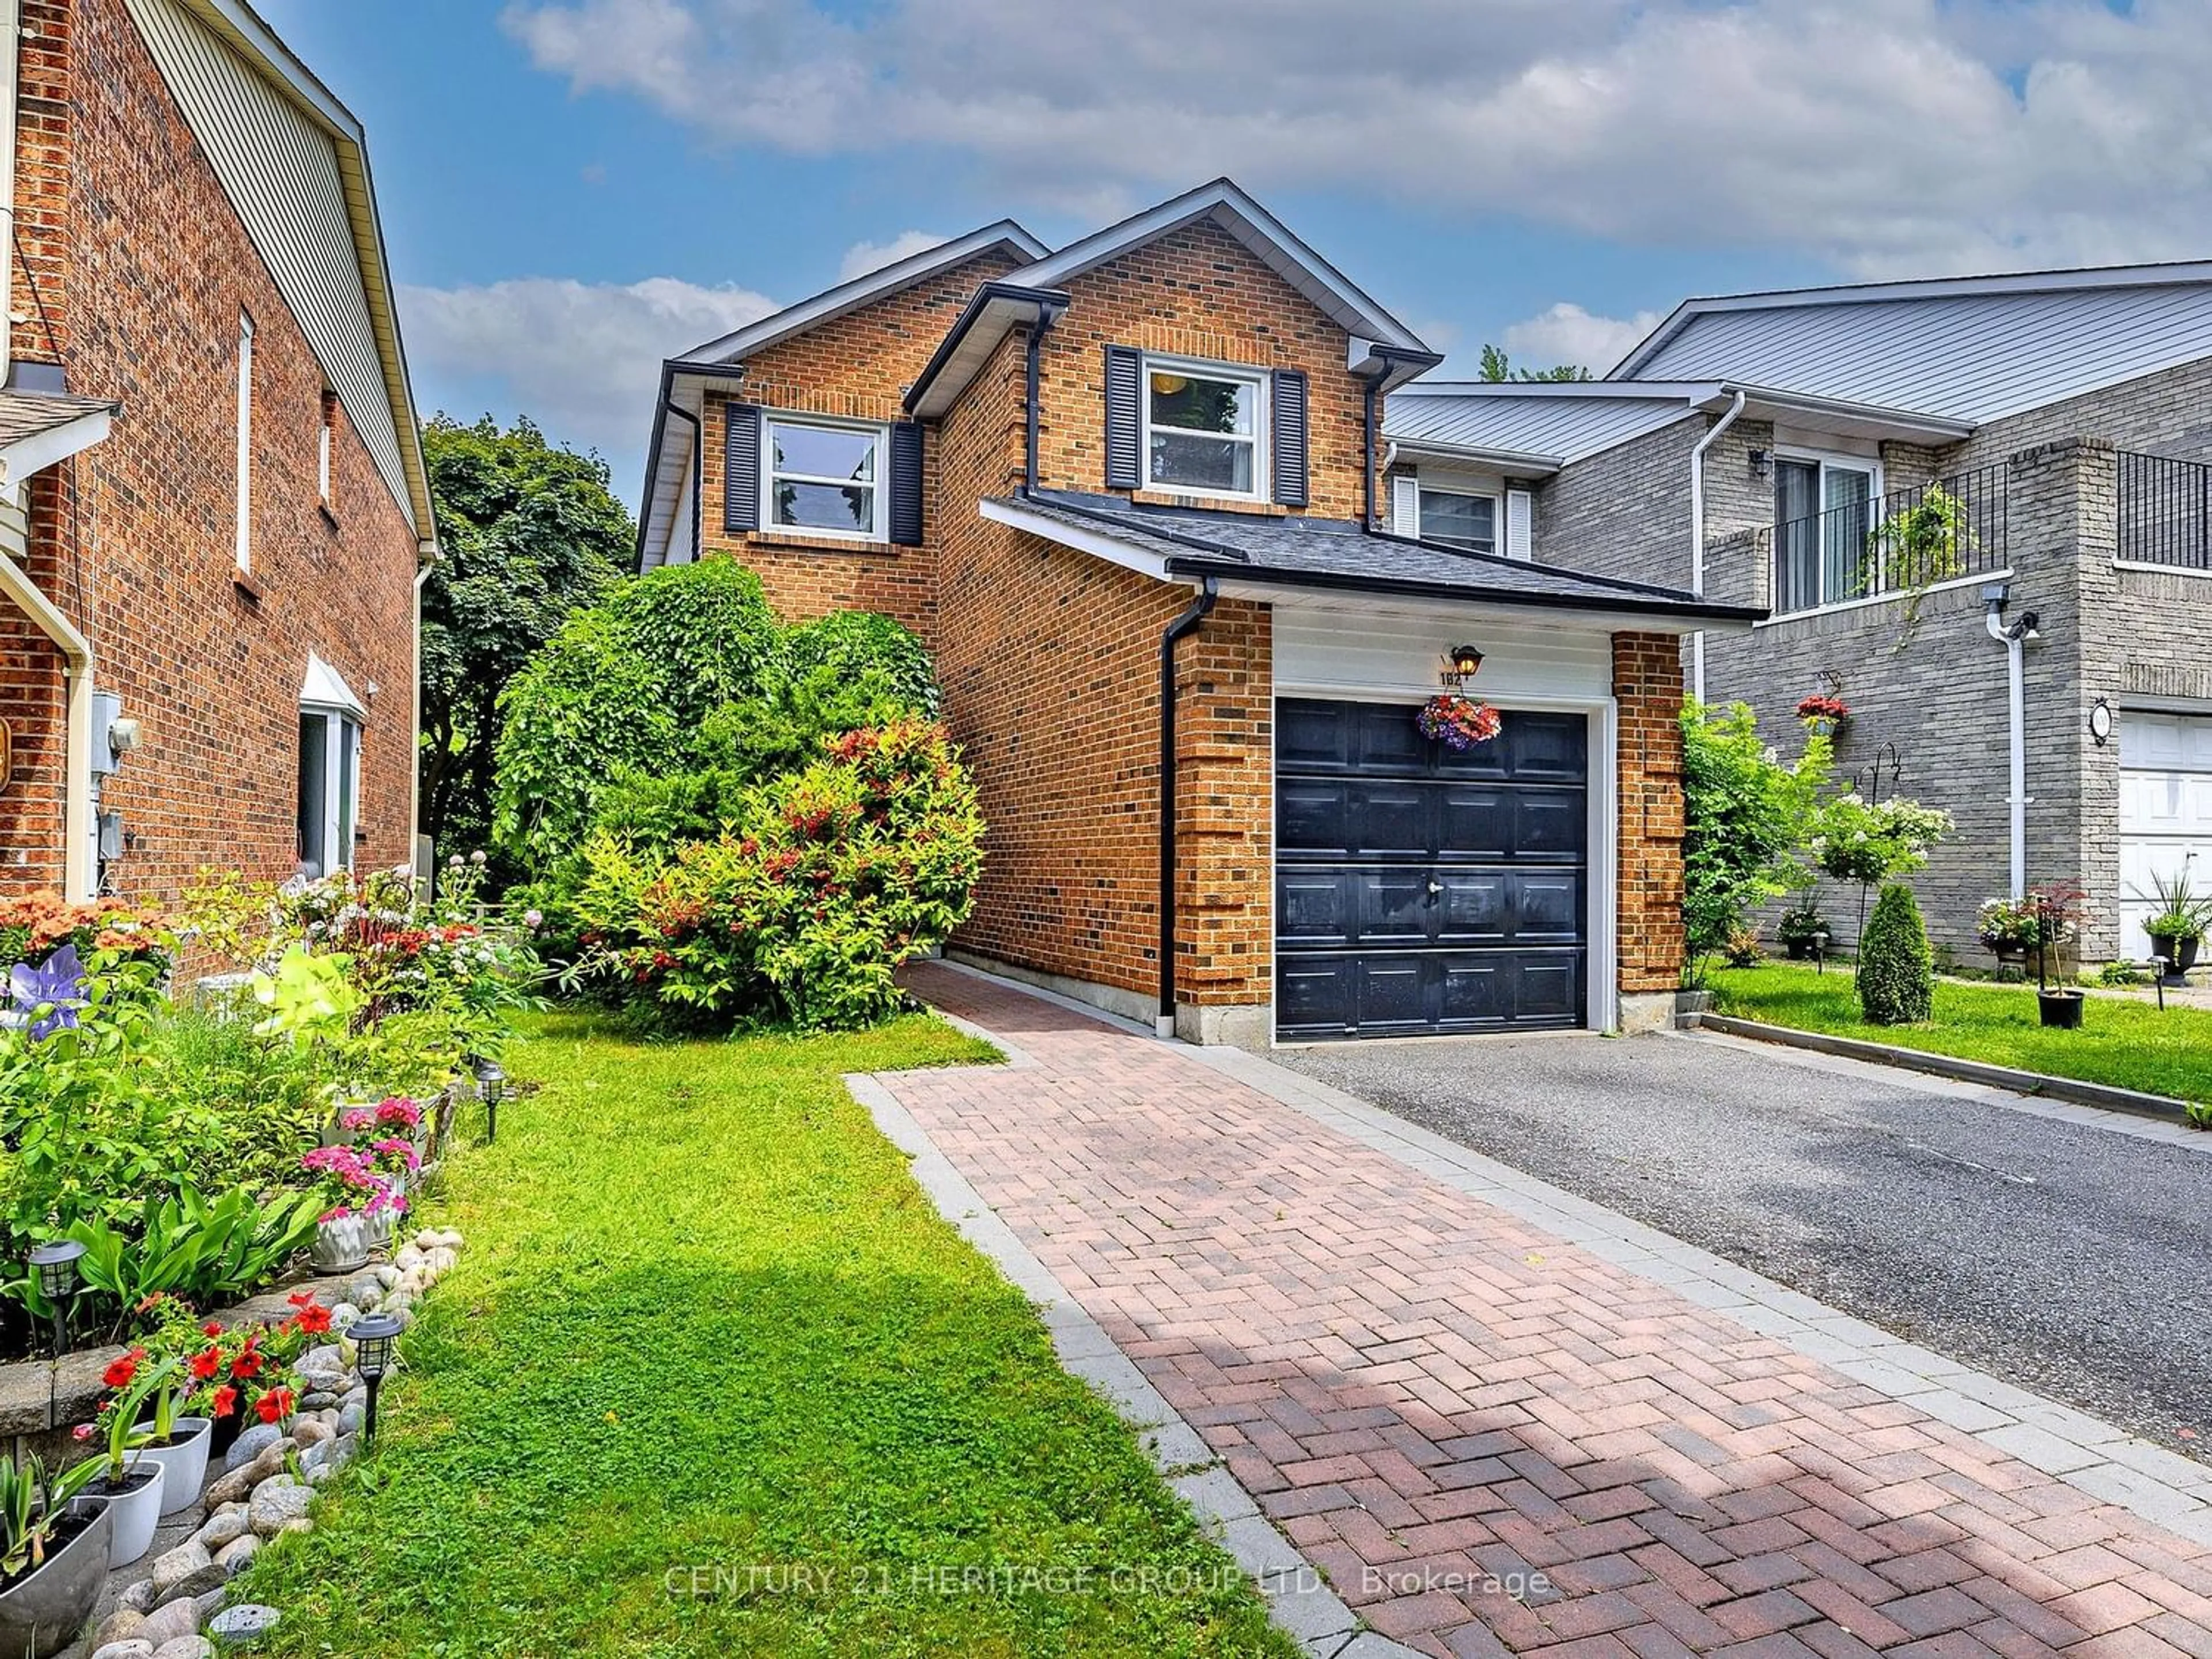 Home with brick exterior material for 102 Baywood Crt, Markham Ontario L3T 5W3